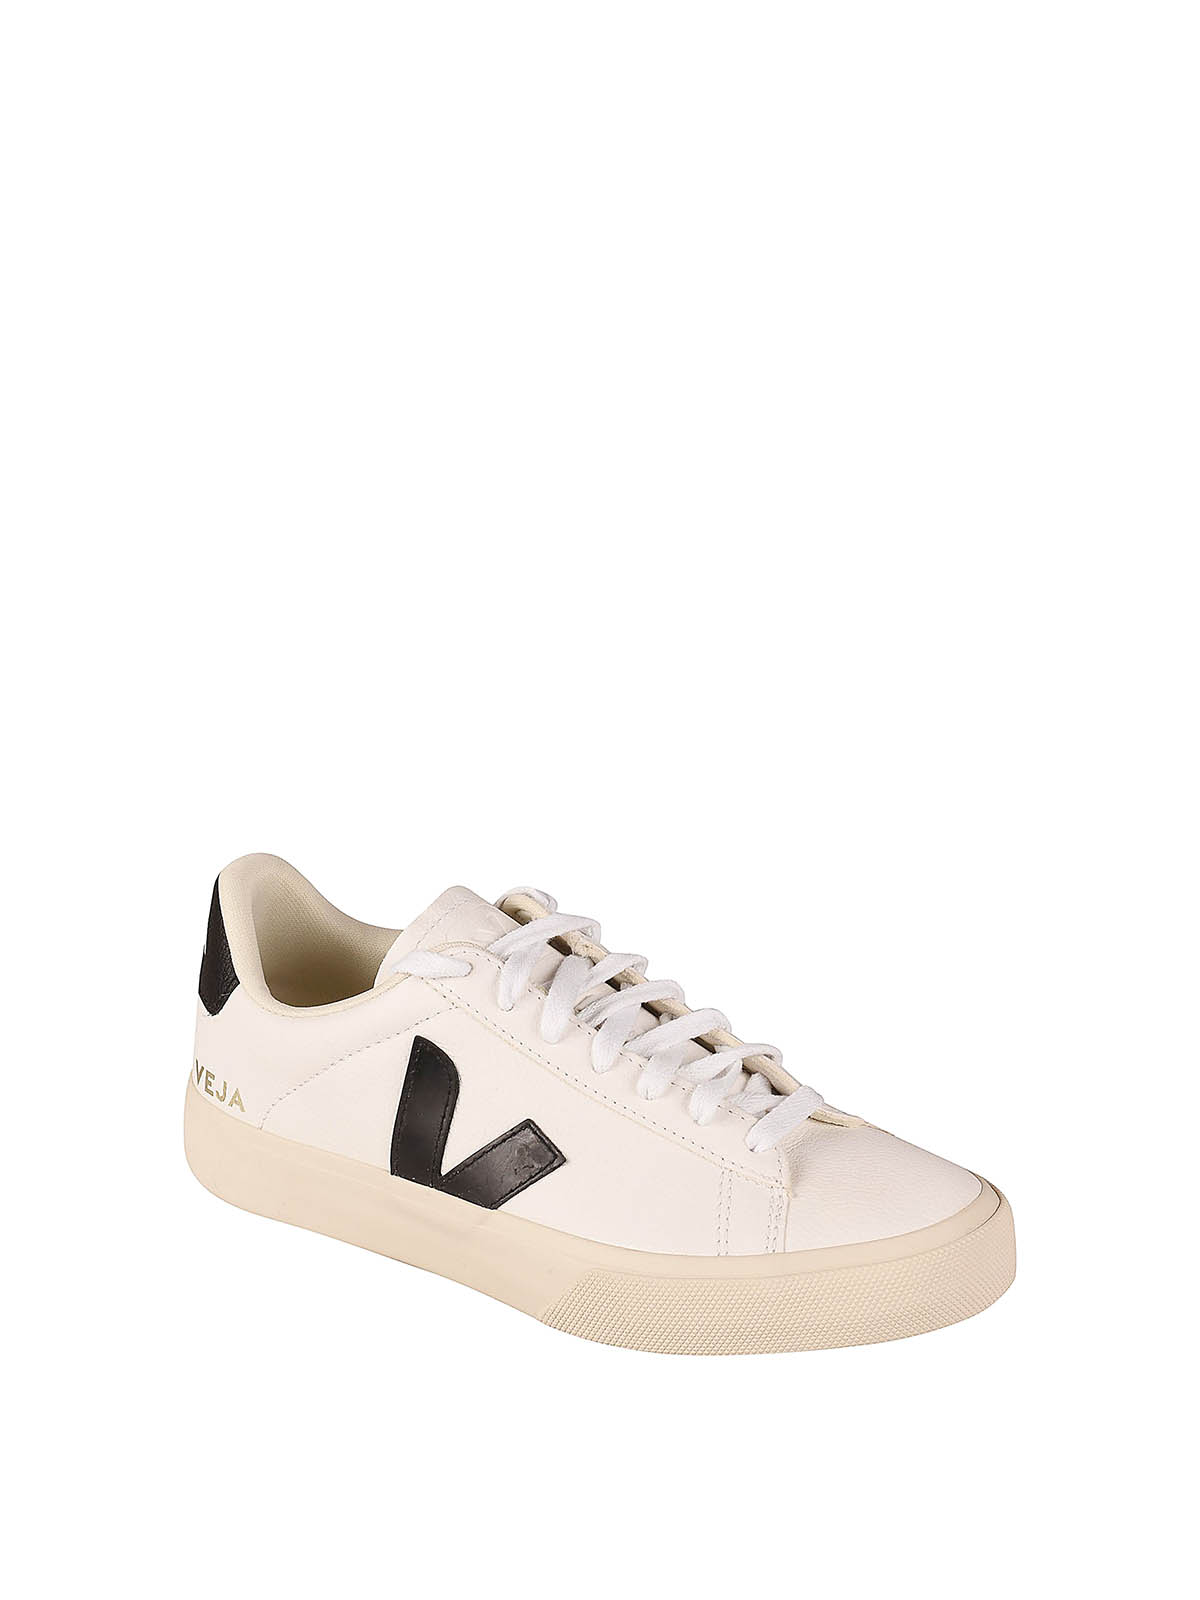 Lace-ups shoes Veja - Leather logo sneakers - CP0501537 | iKRIX.com